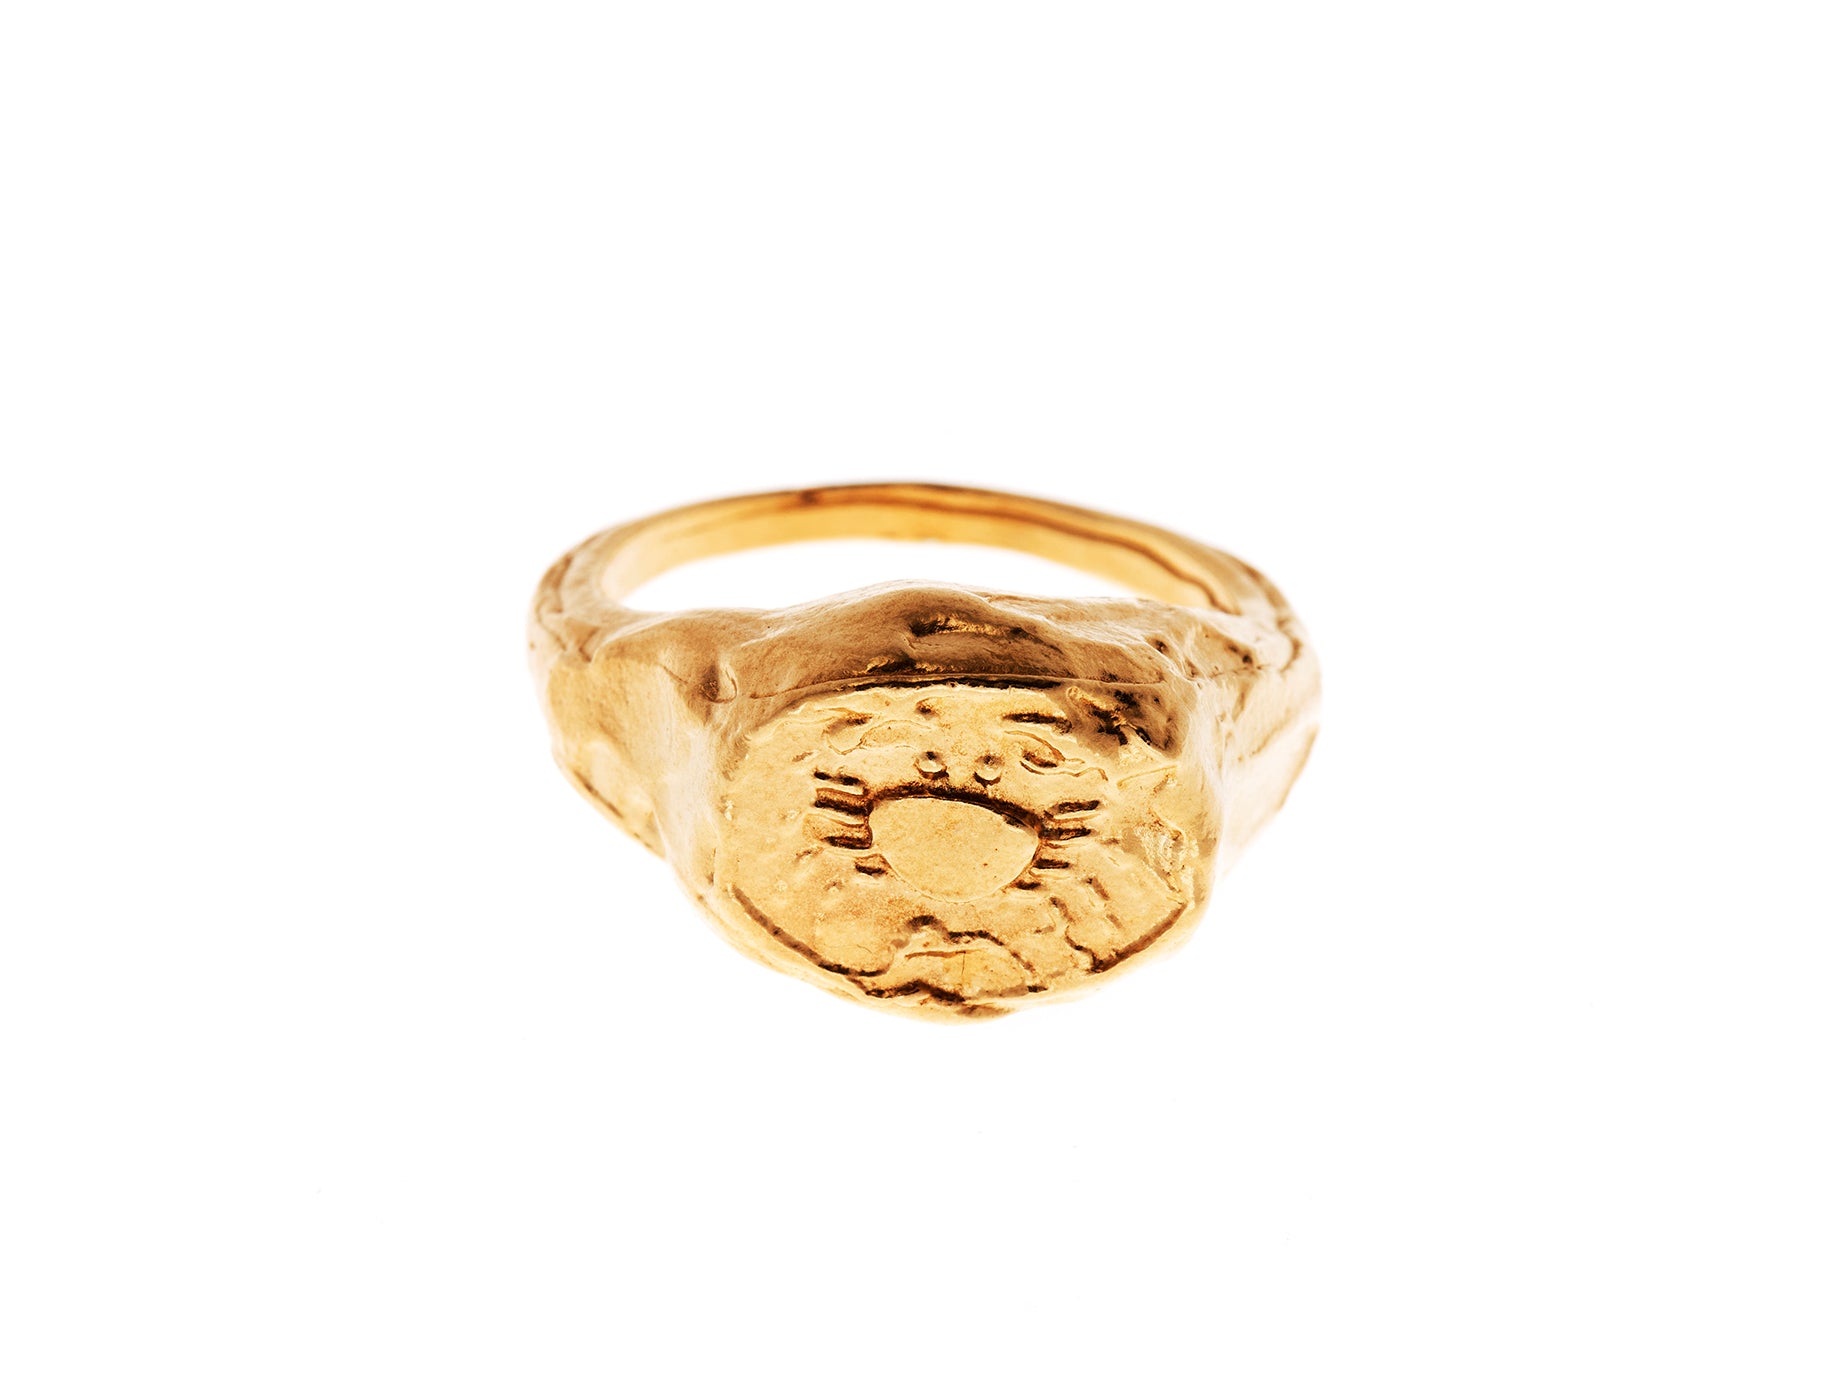 The Cancer Signet Ring